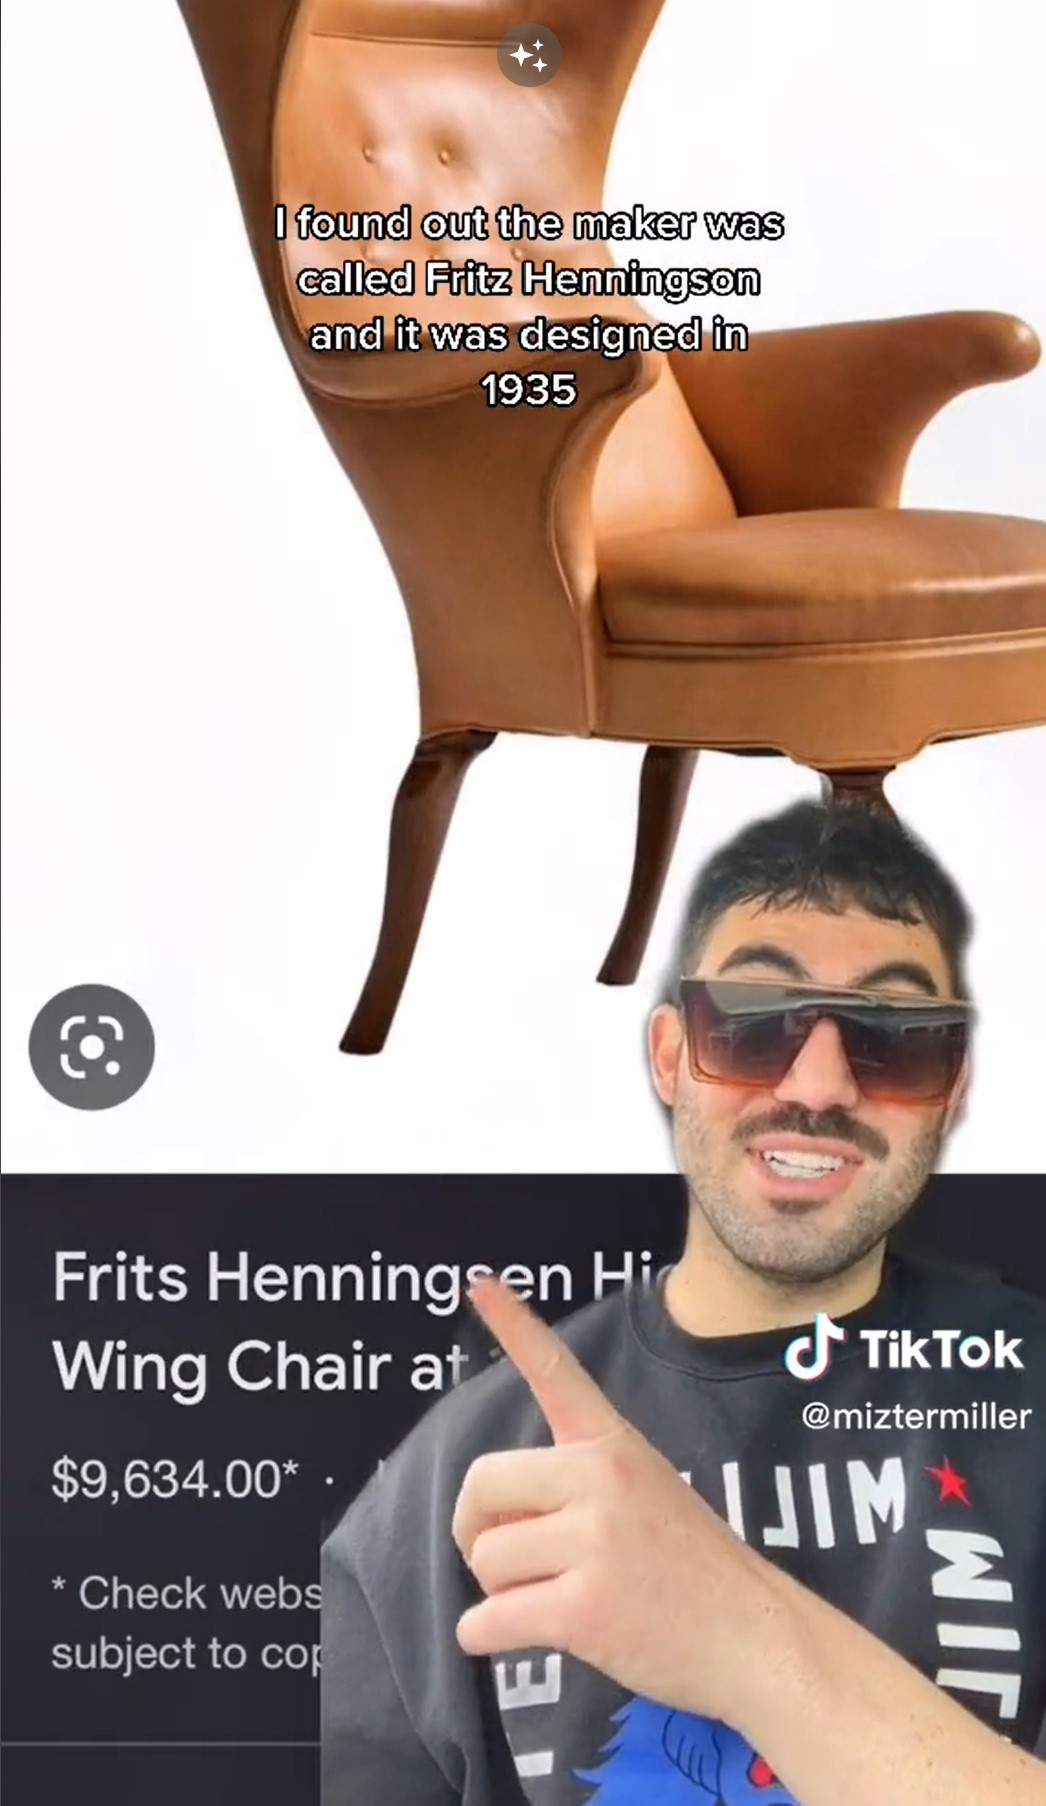 Justin finds out on Google how much is a Frits Henningsen chair.